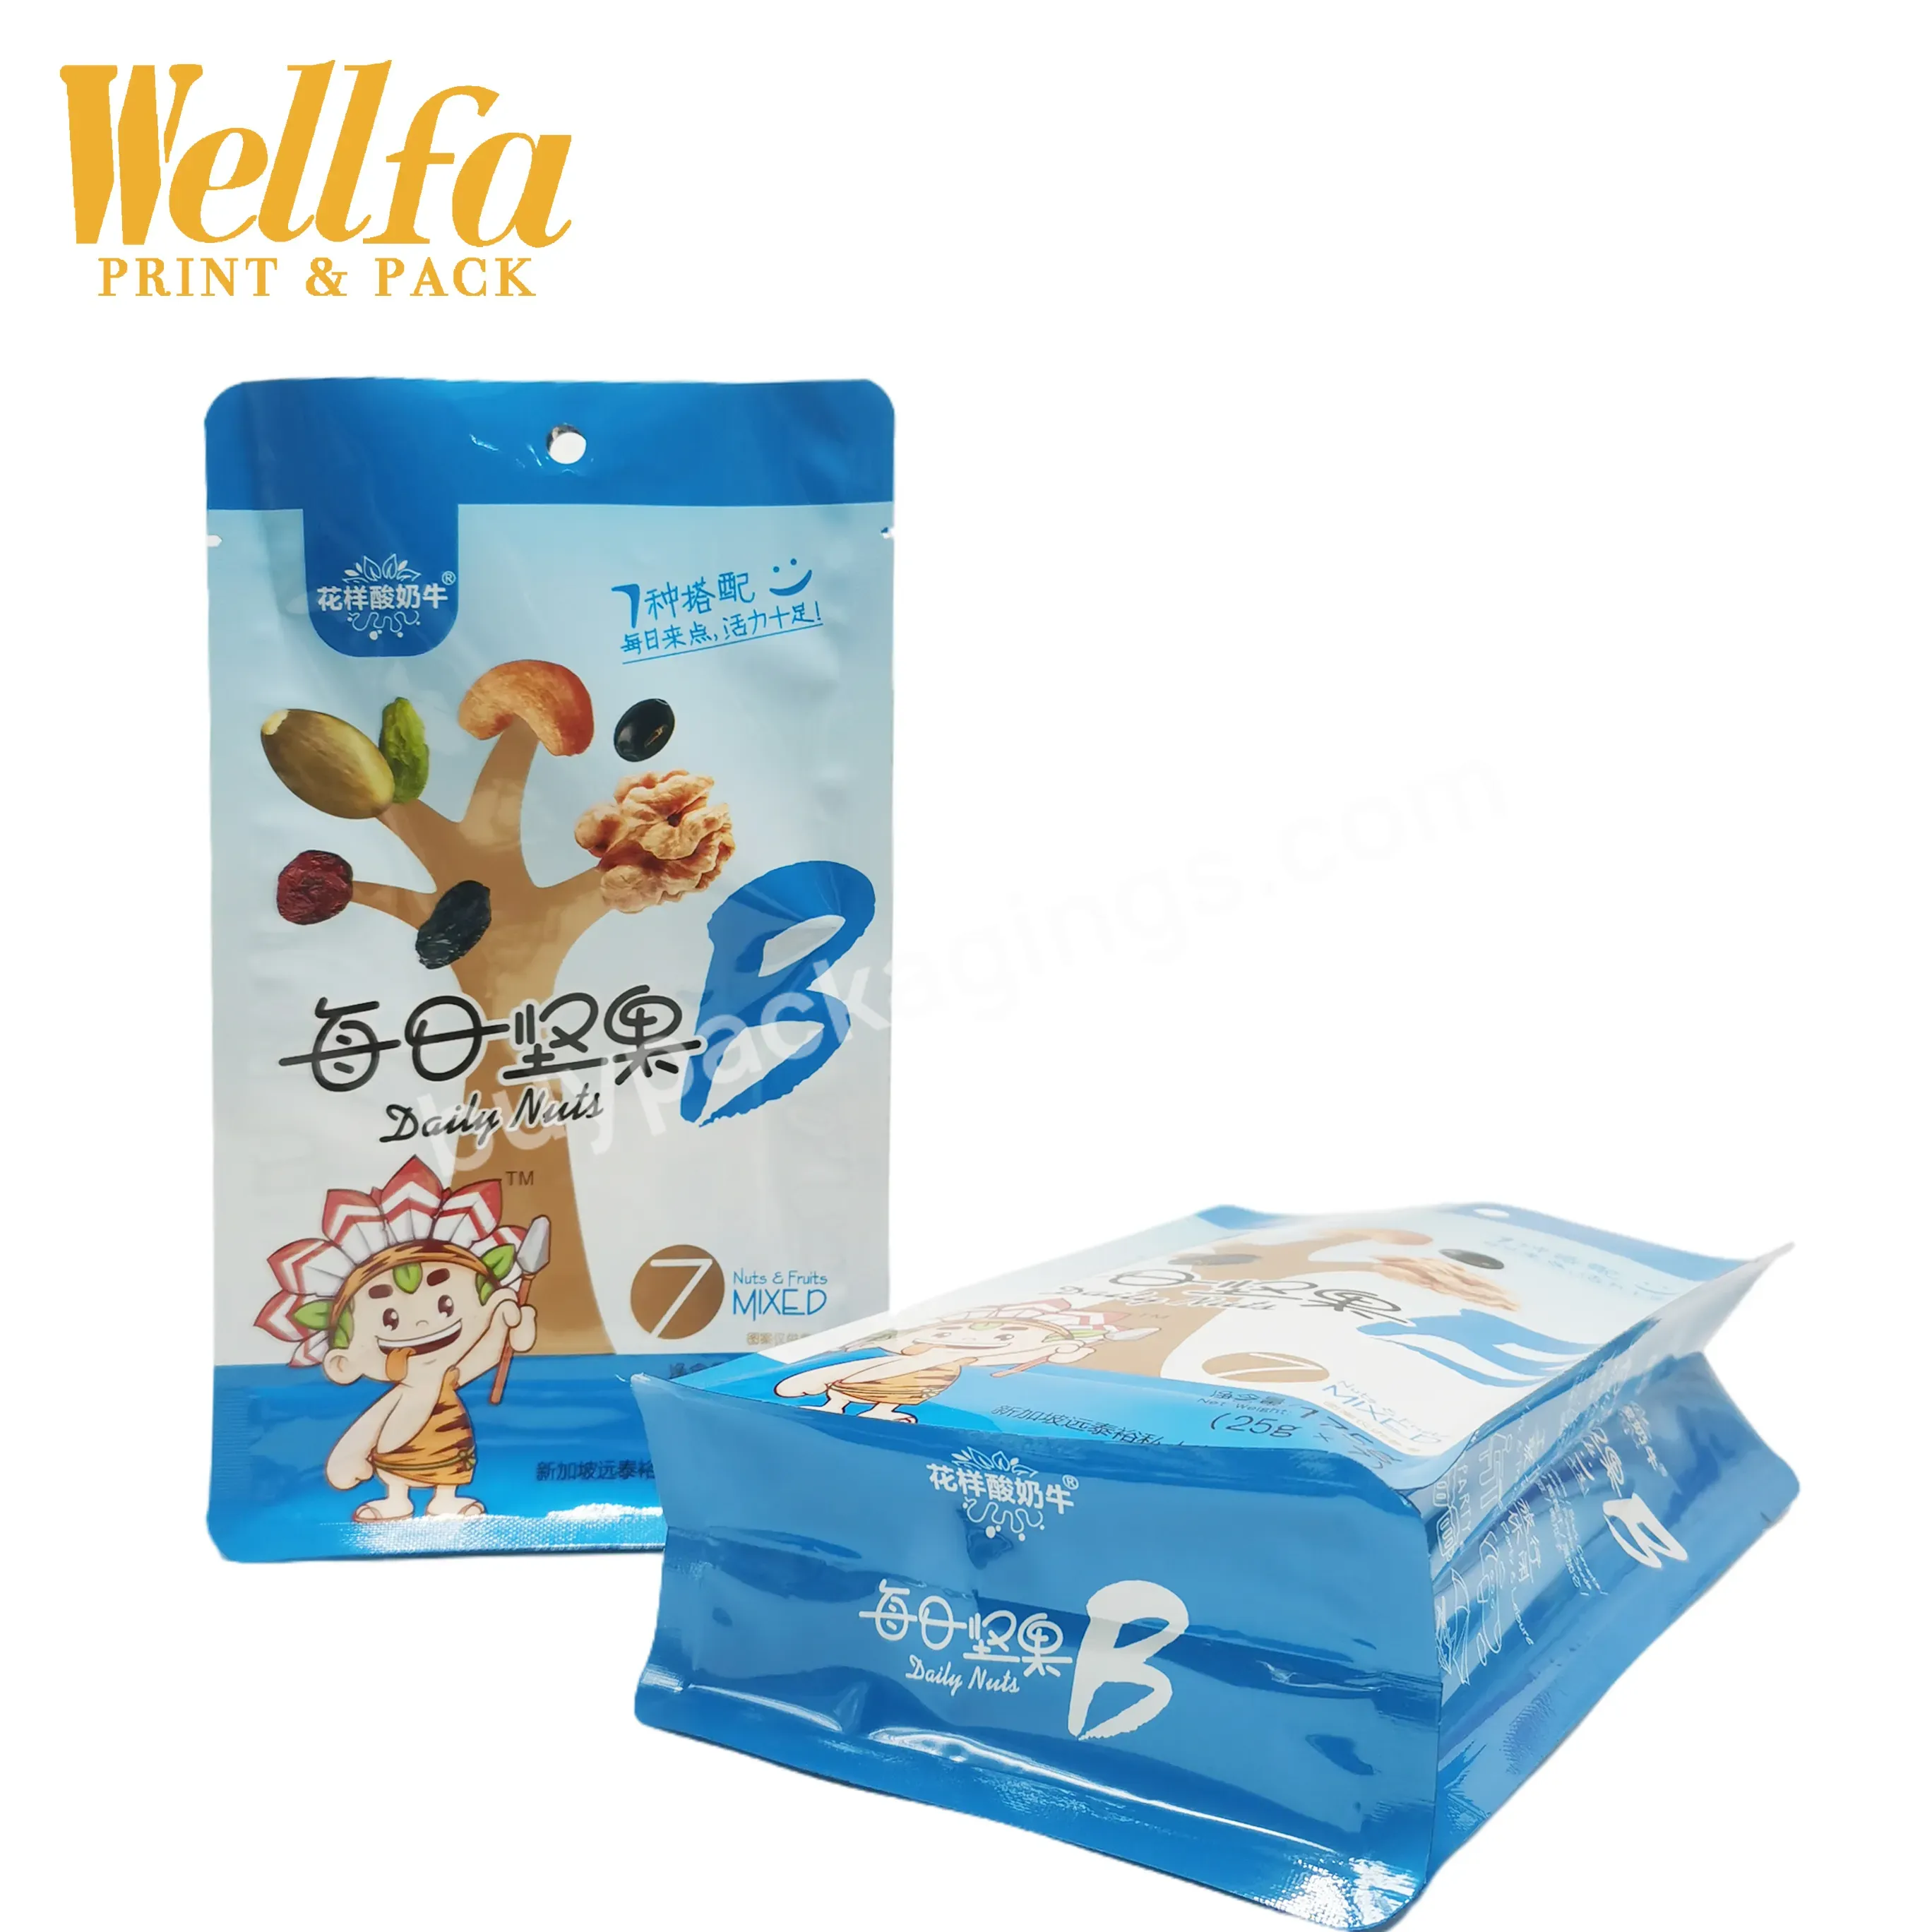 Oem Custom 500g 1kg Paper/plastic Flat Bottom Pouch Chocolate Powder /nut/ Meat/spices/pet Food Grade Packaging - Buy Customized Nut/milk Powder Packaging,Spice Protein Powder Pouch,Paper Material Food Grade Packaging Bag.